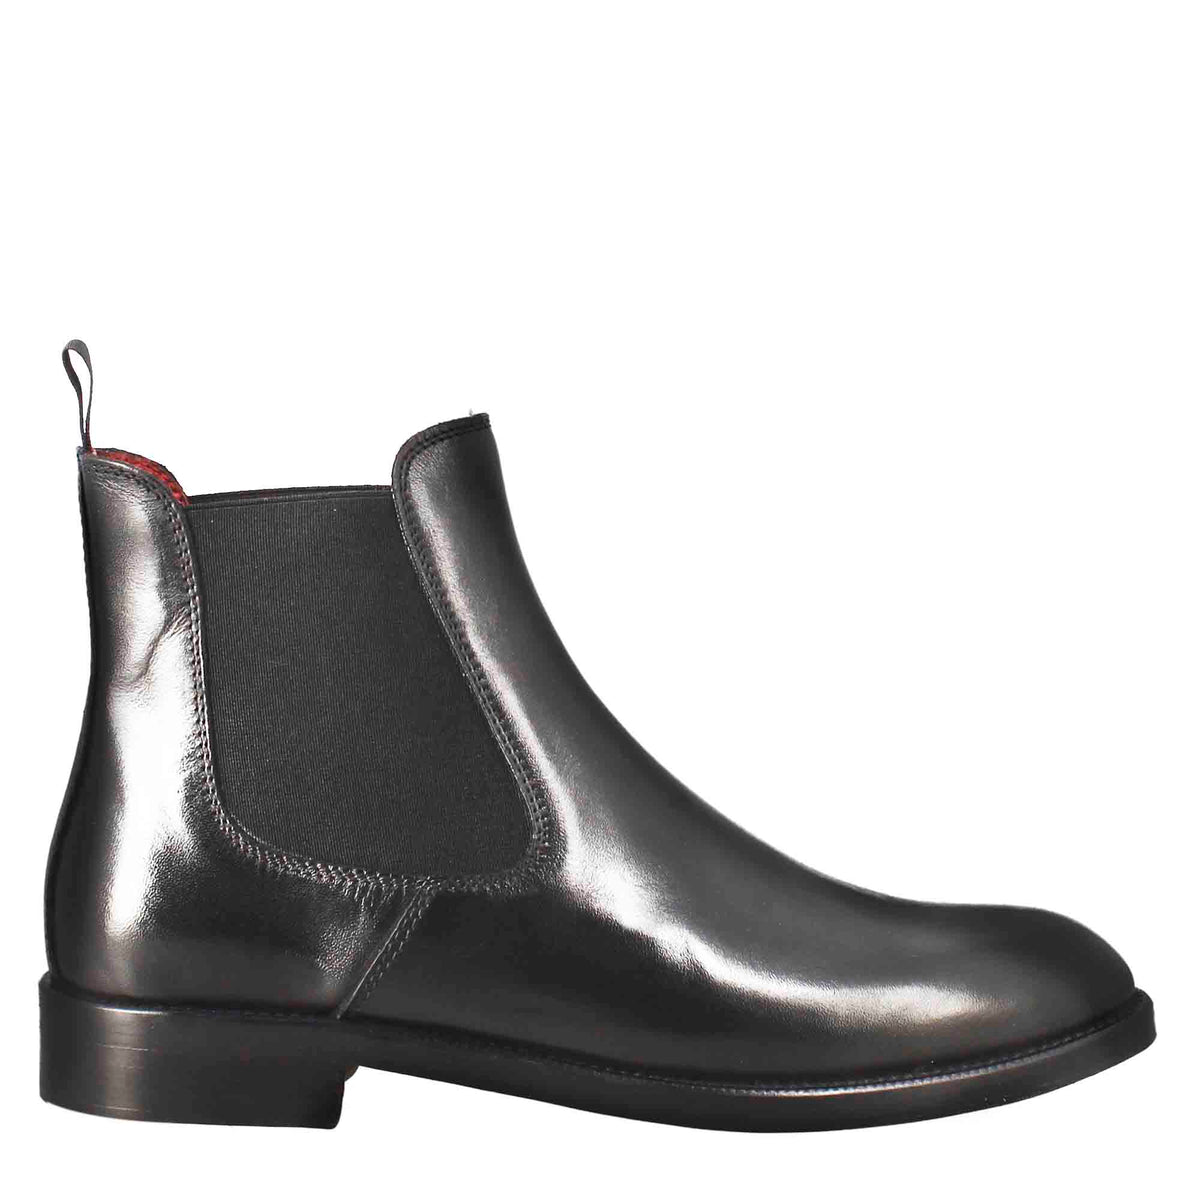 Women's smooth Chelsea boot in black leather